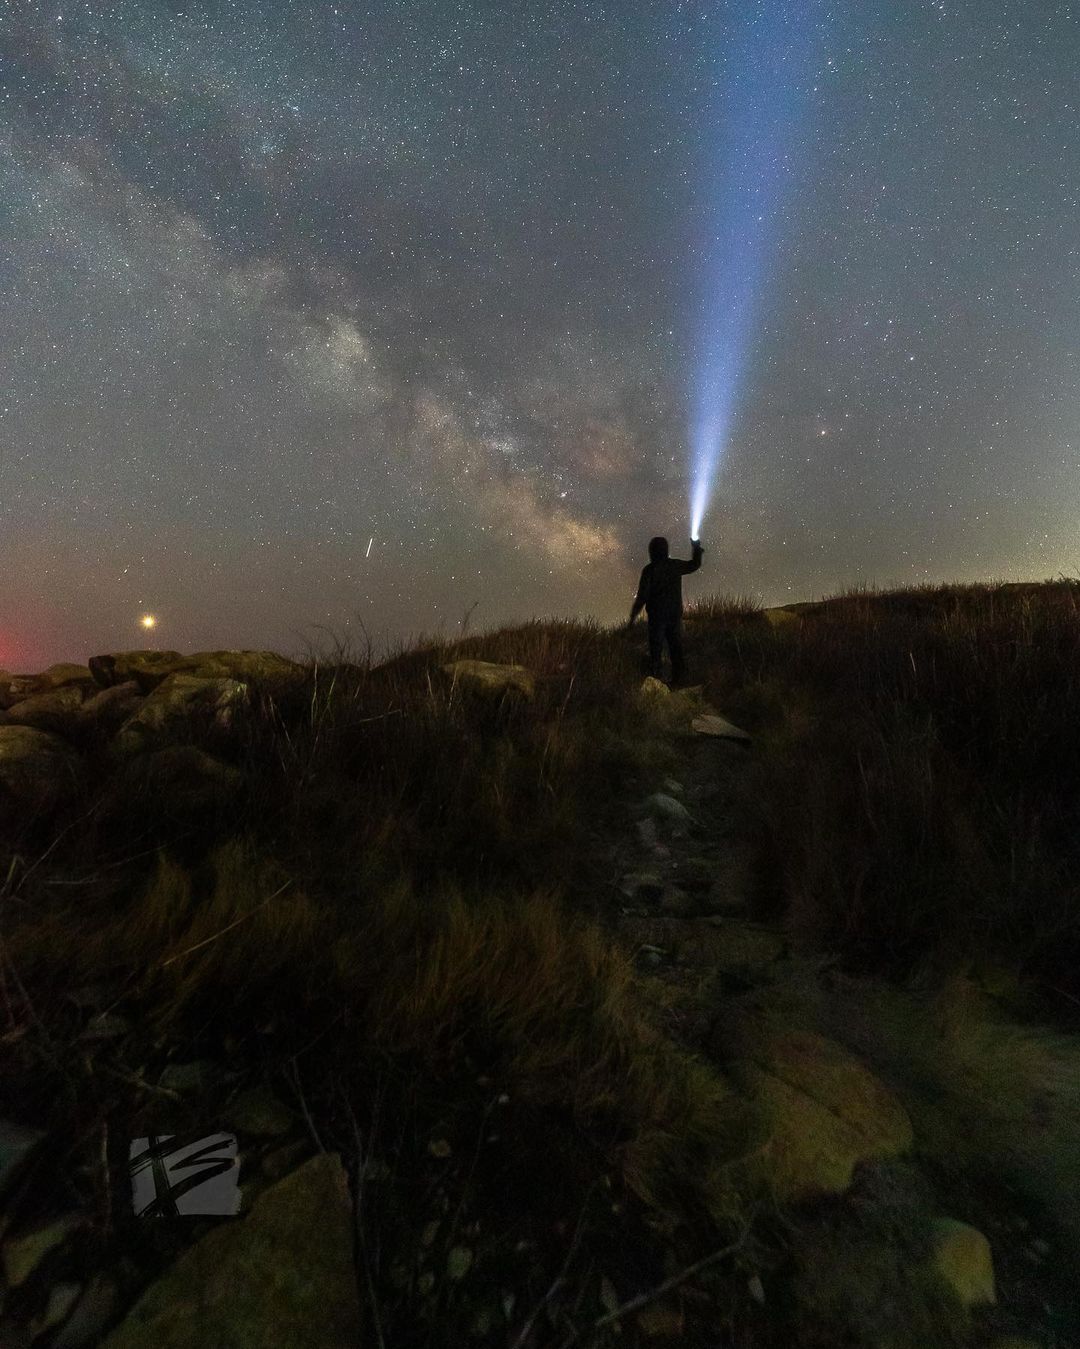 A loan person makes their way through a dark landscape with a flashlight and a sky full of stars.